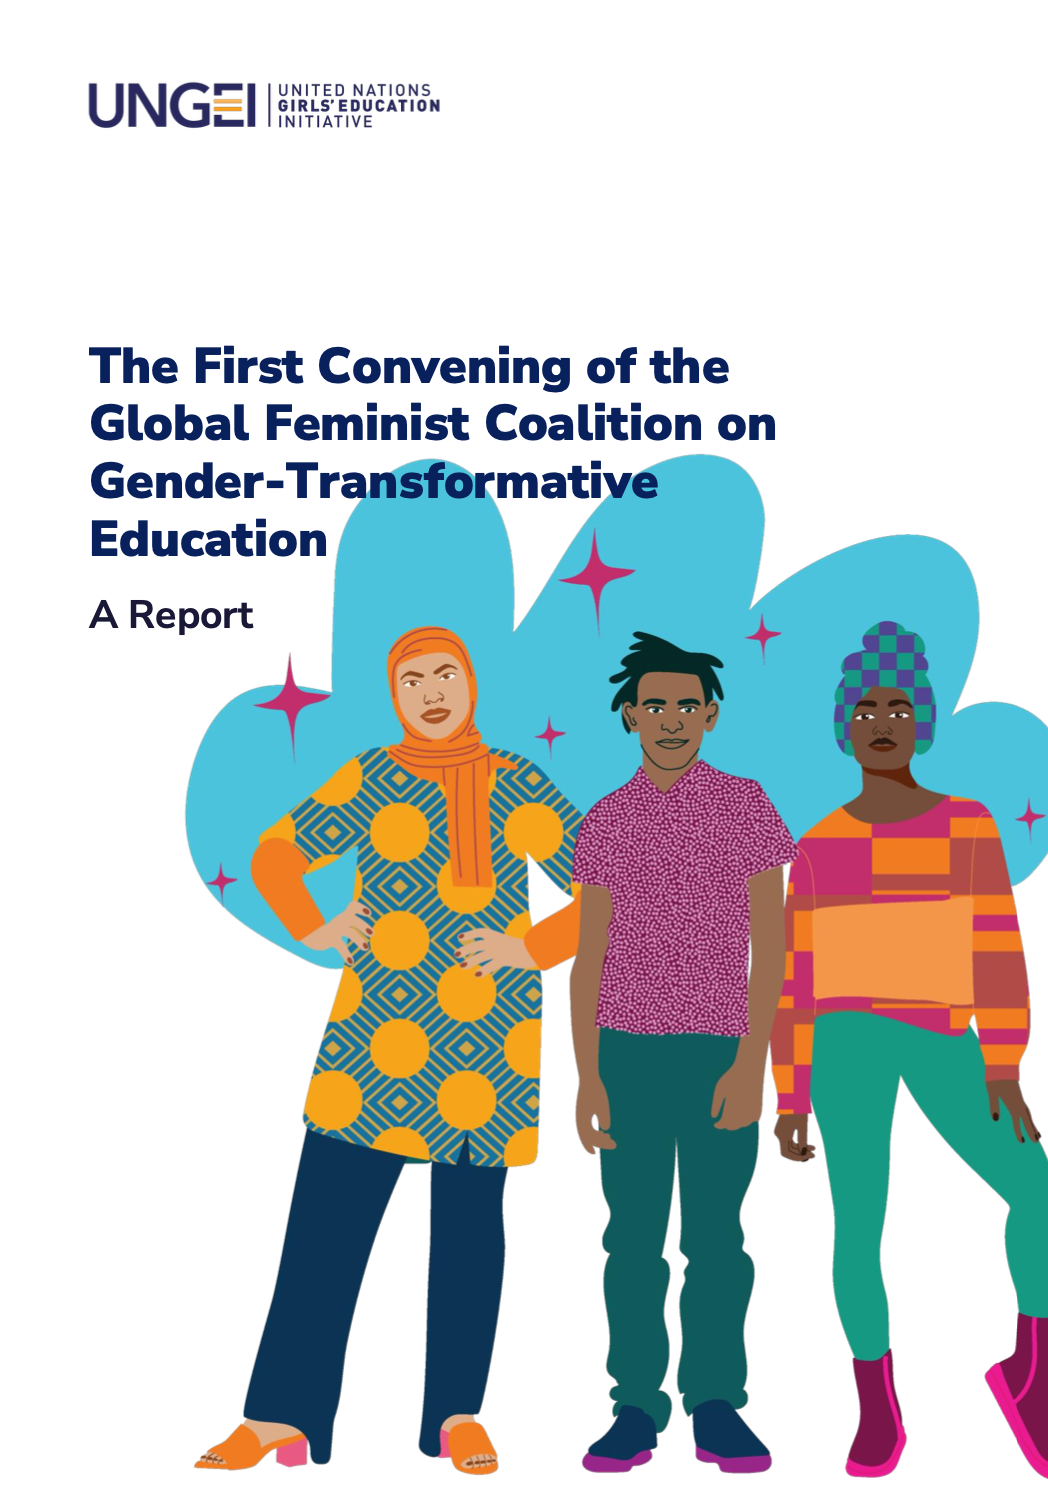 The First Convening of the Global Feminist Coalition on Gender-Transformative Education